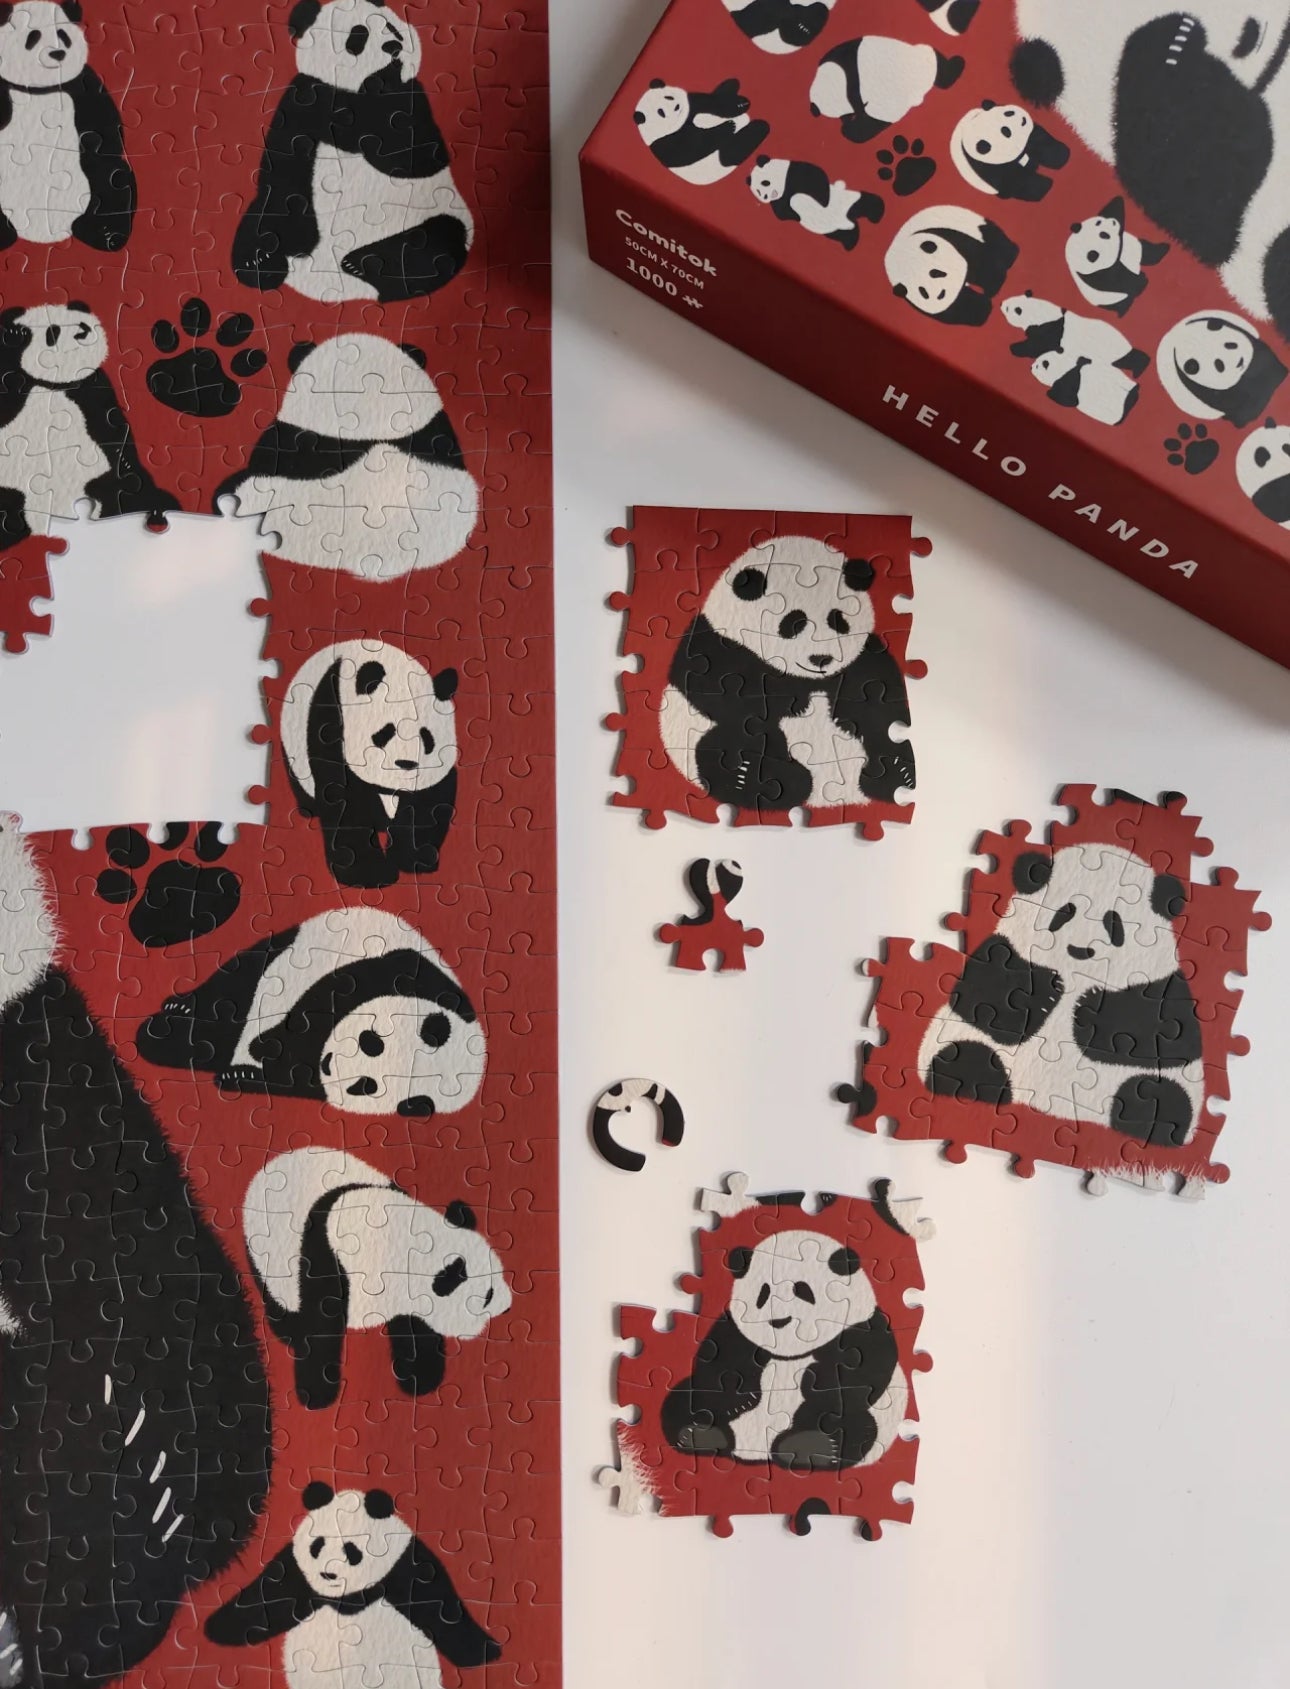 1,000 Pcs "HELLO PANDA" decompressed high quality trendy art with cute color reproduction puzzle - high definition printing with a good bite -- 1000 Pcs with auxiliary partition on the back - 50 x 70cm